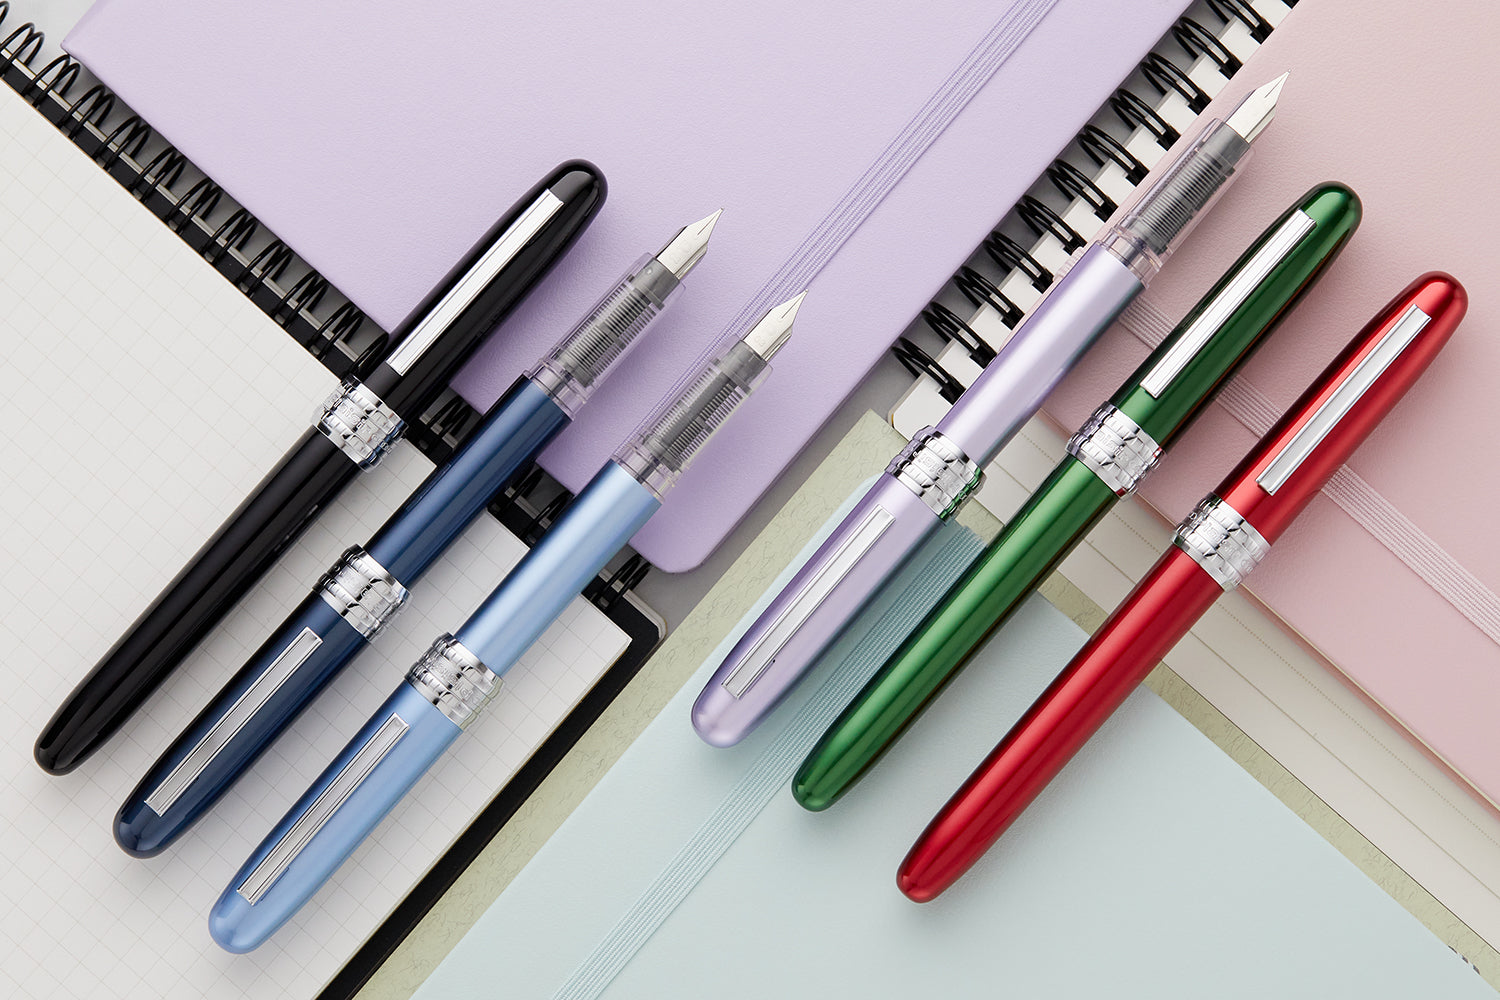 Several aluminum fountain pens lined up diagonally on top of notebooks